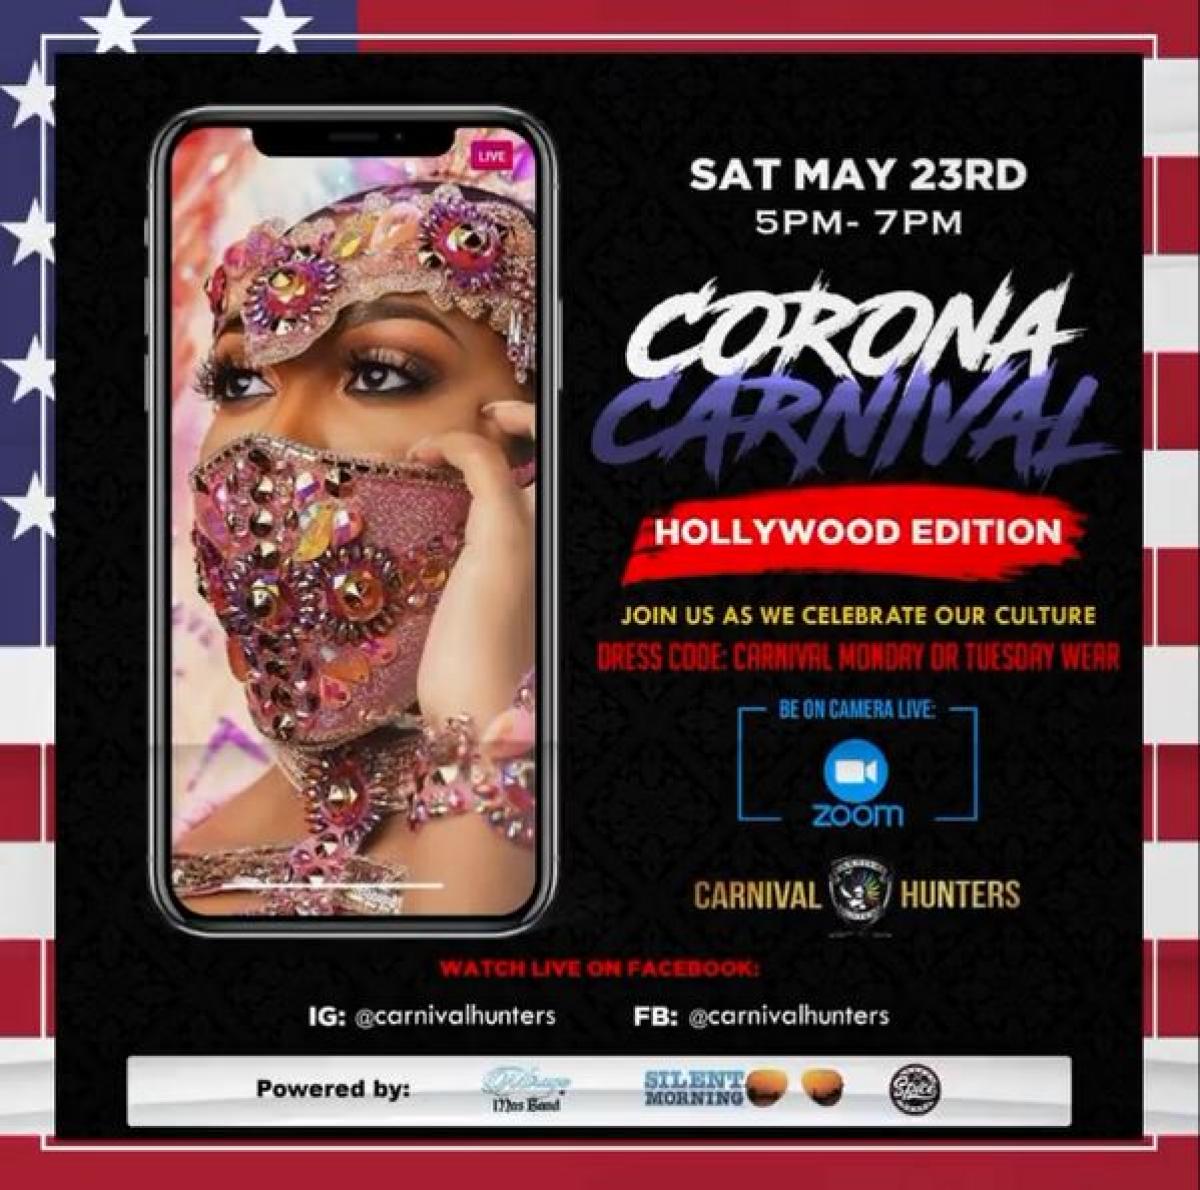 Corona Carnival Hollywood Edition flyer or graphic.